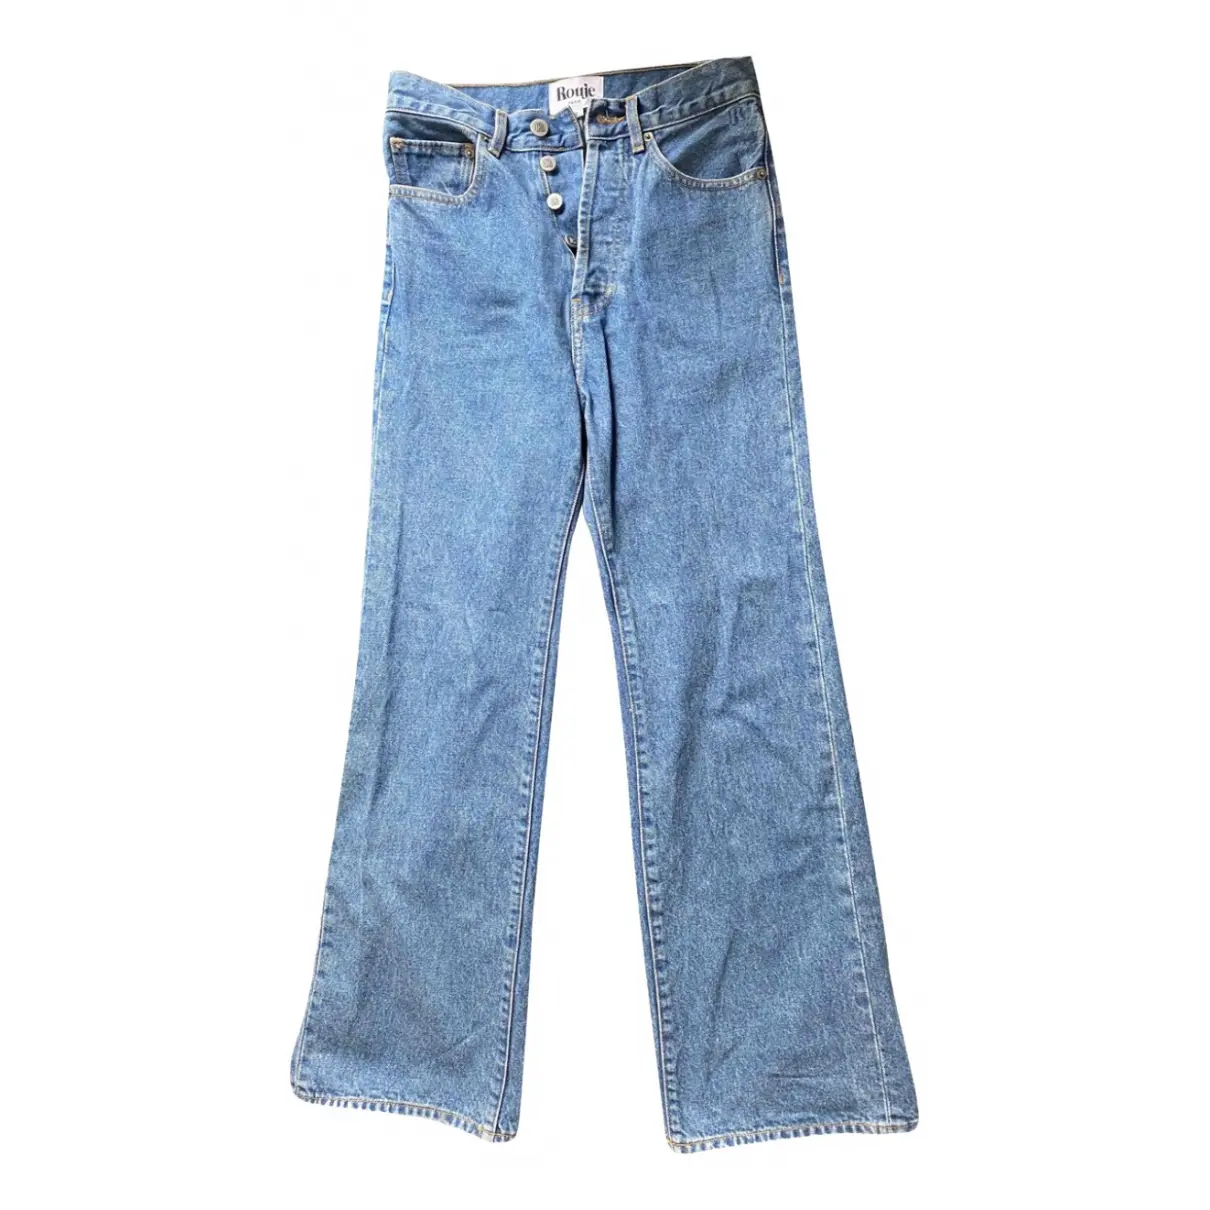 Spring Summer 2020 large jeans Rouje